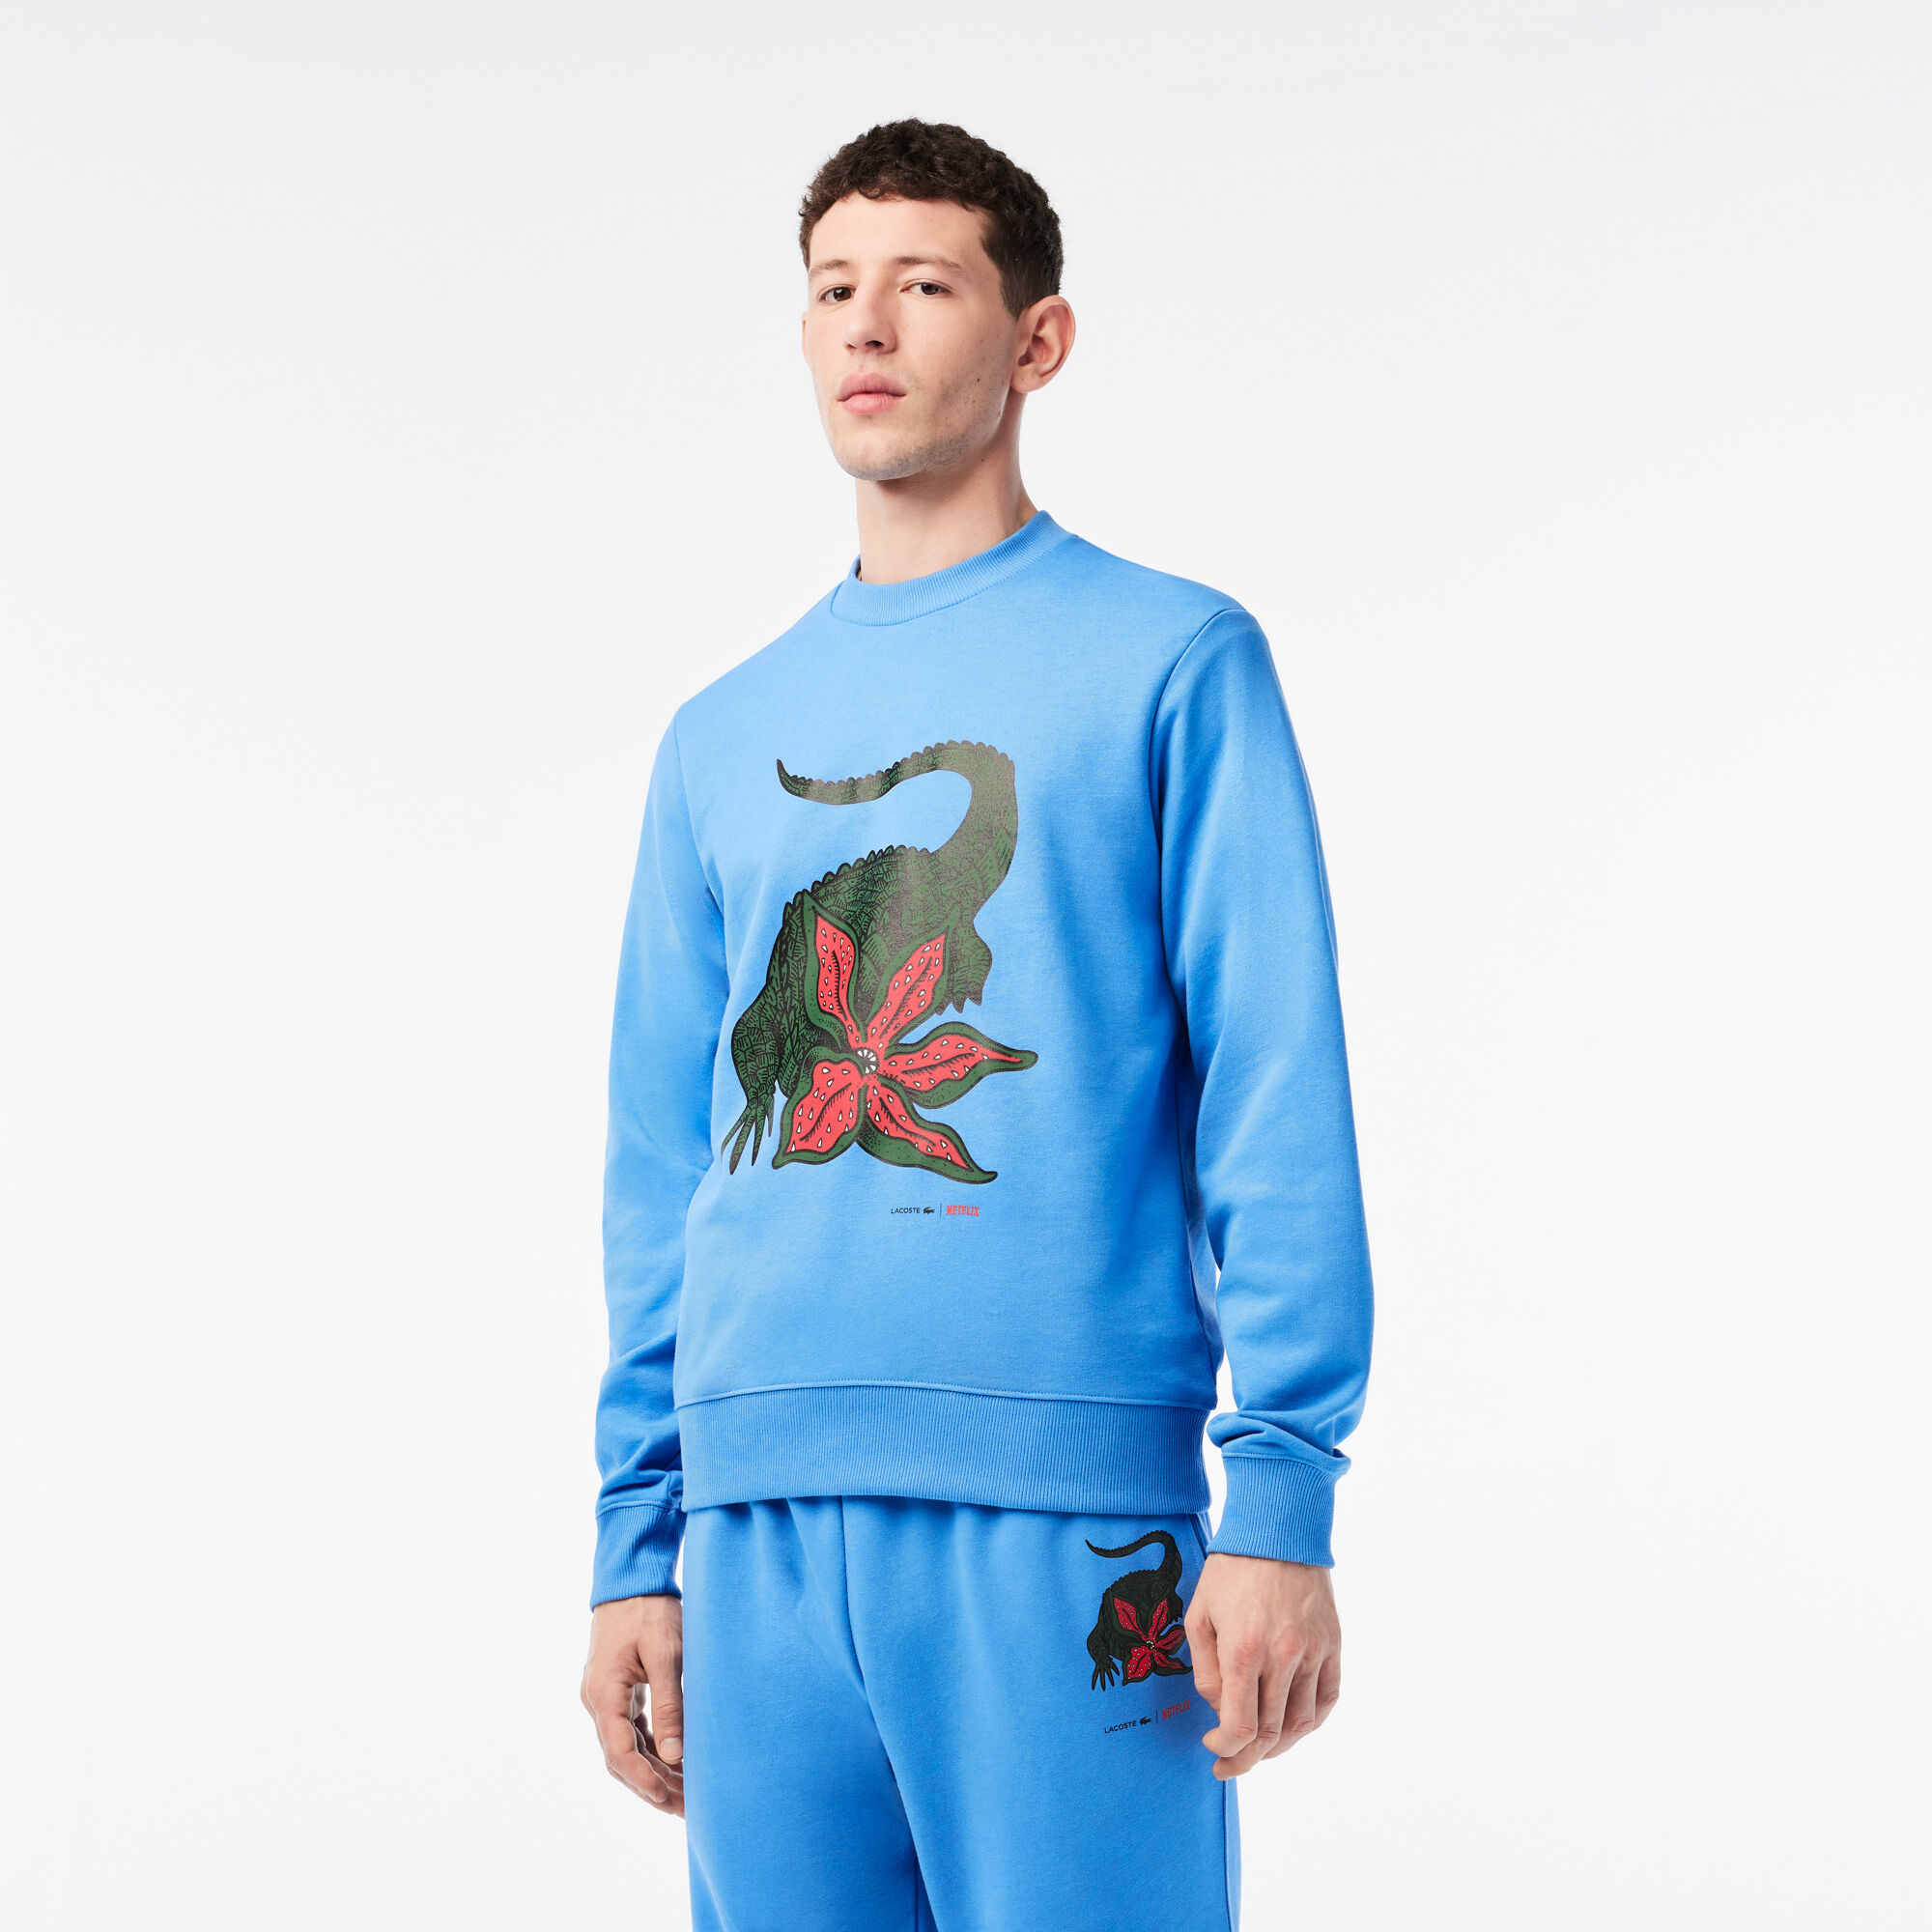 All Sweatshirts | Lacoste Clothing | LACOSTE